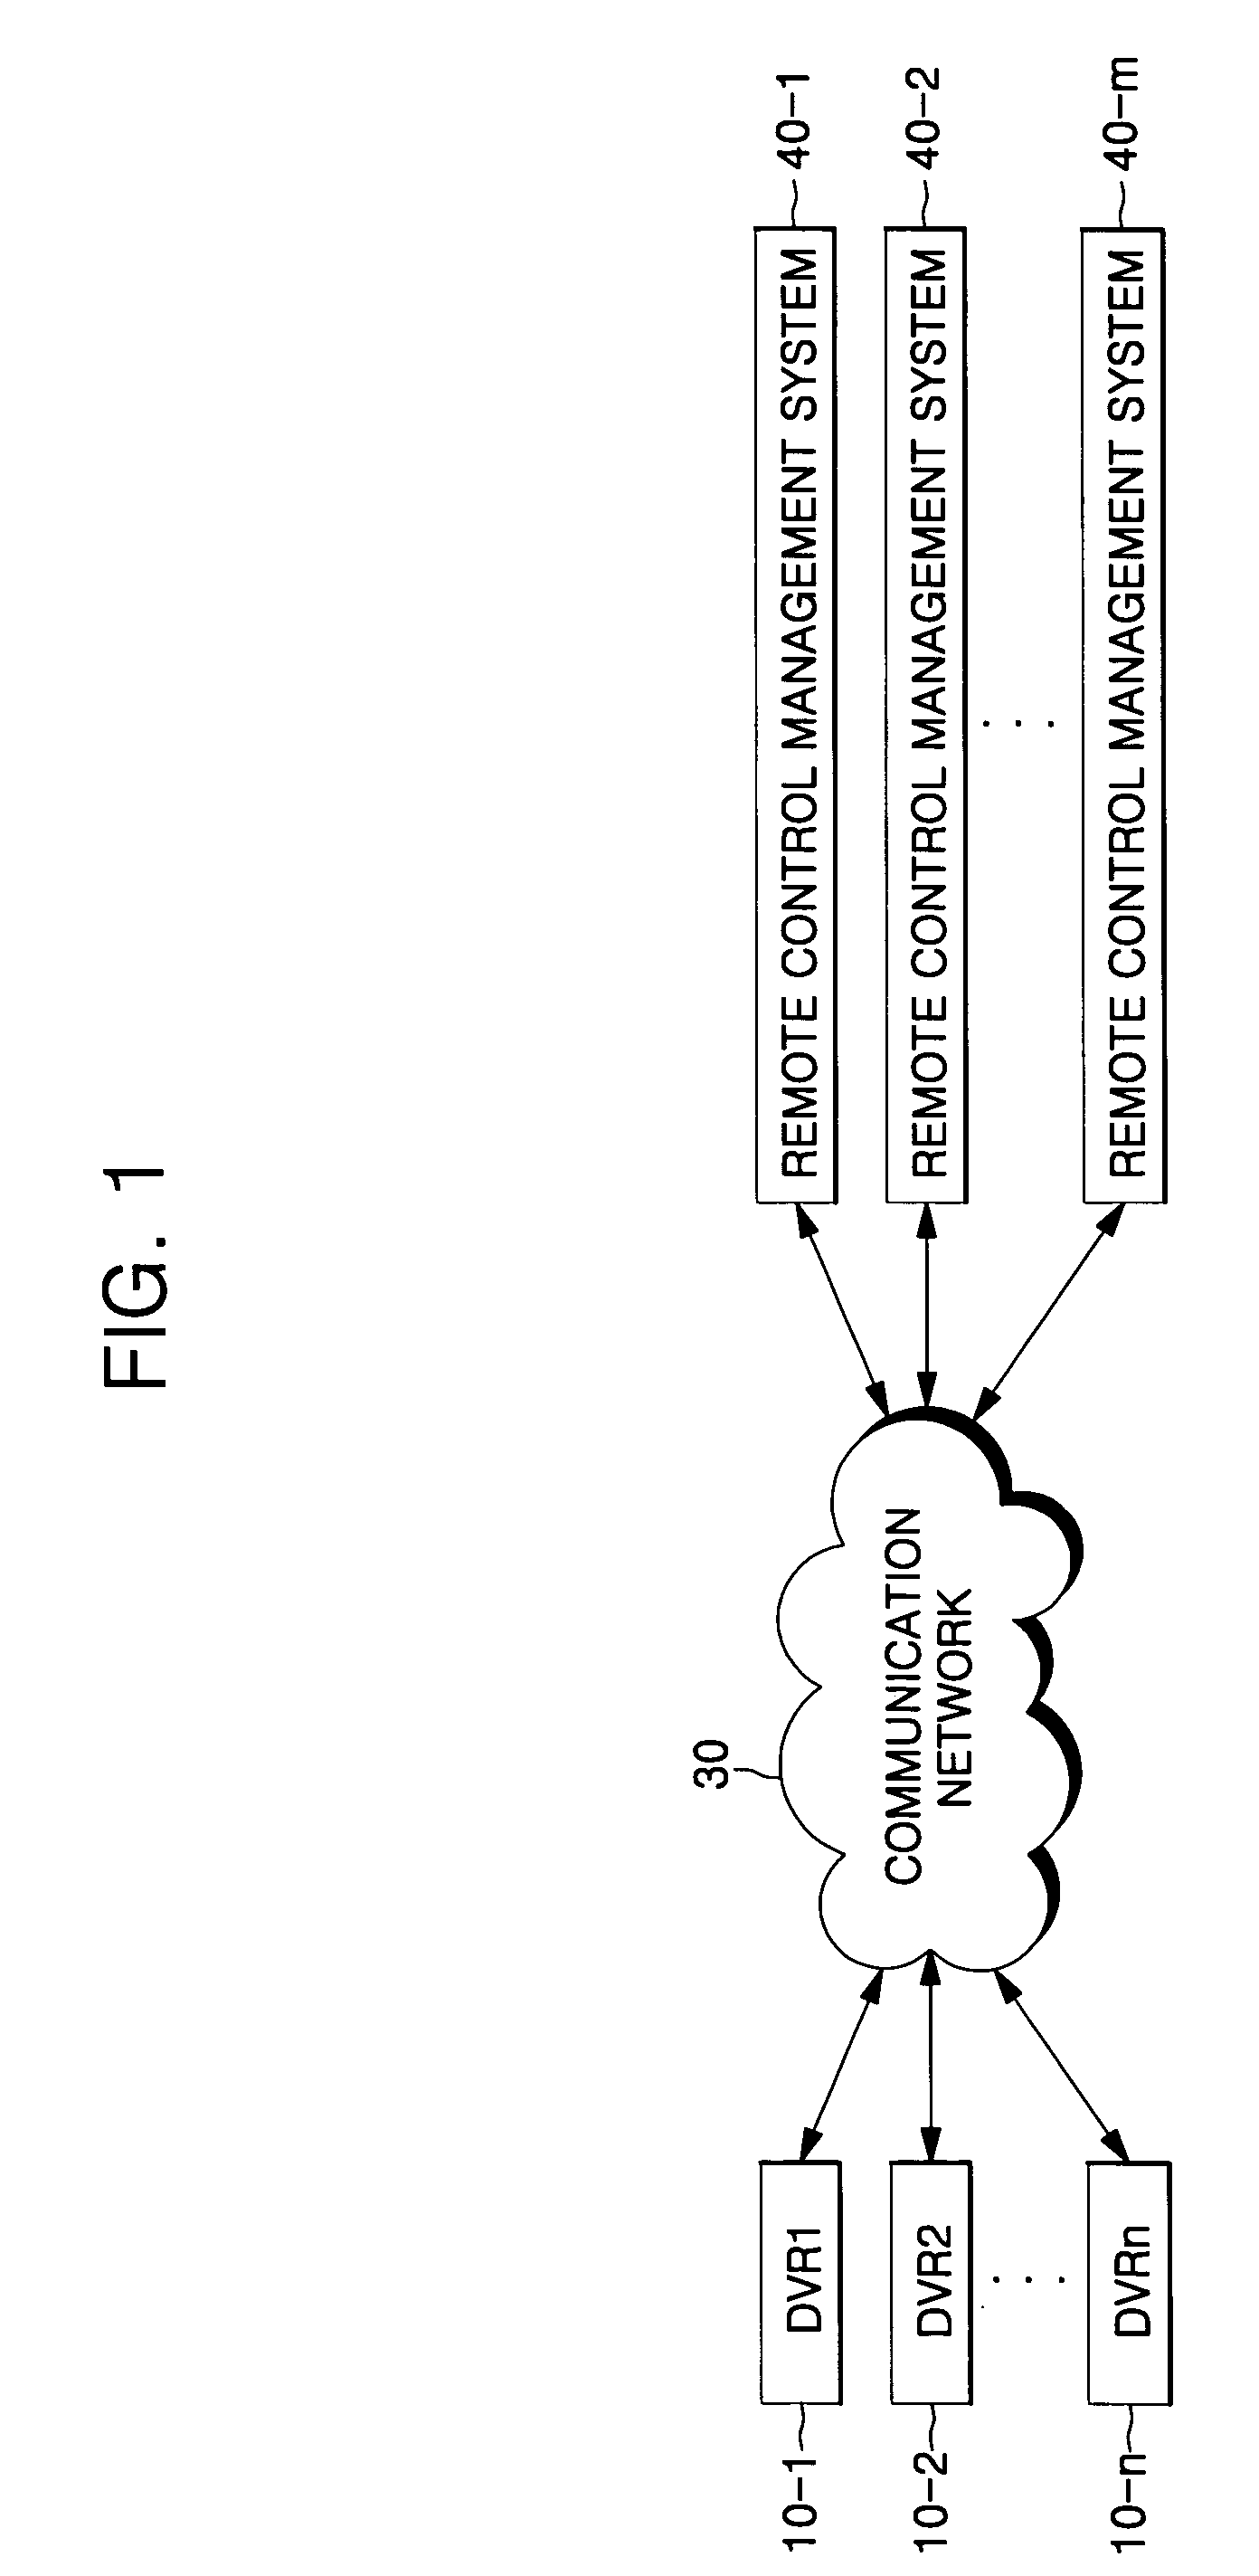 Name service system and method thereof